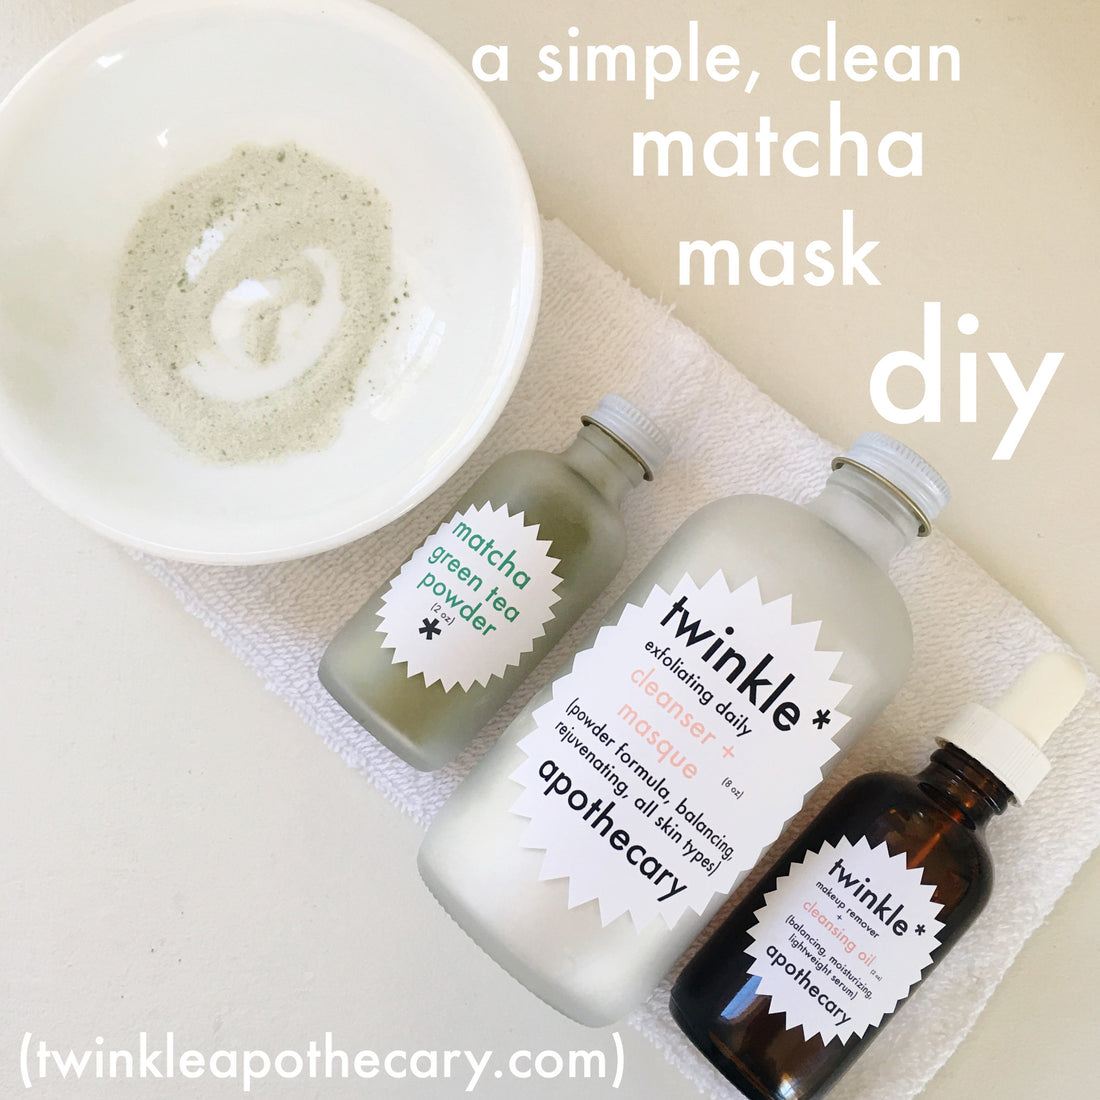 match mask DIY twinkle apothecary 